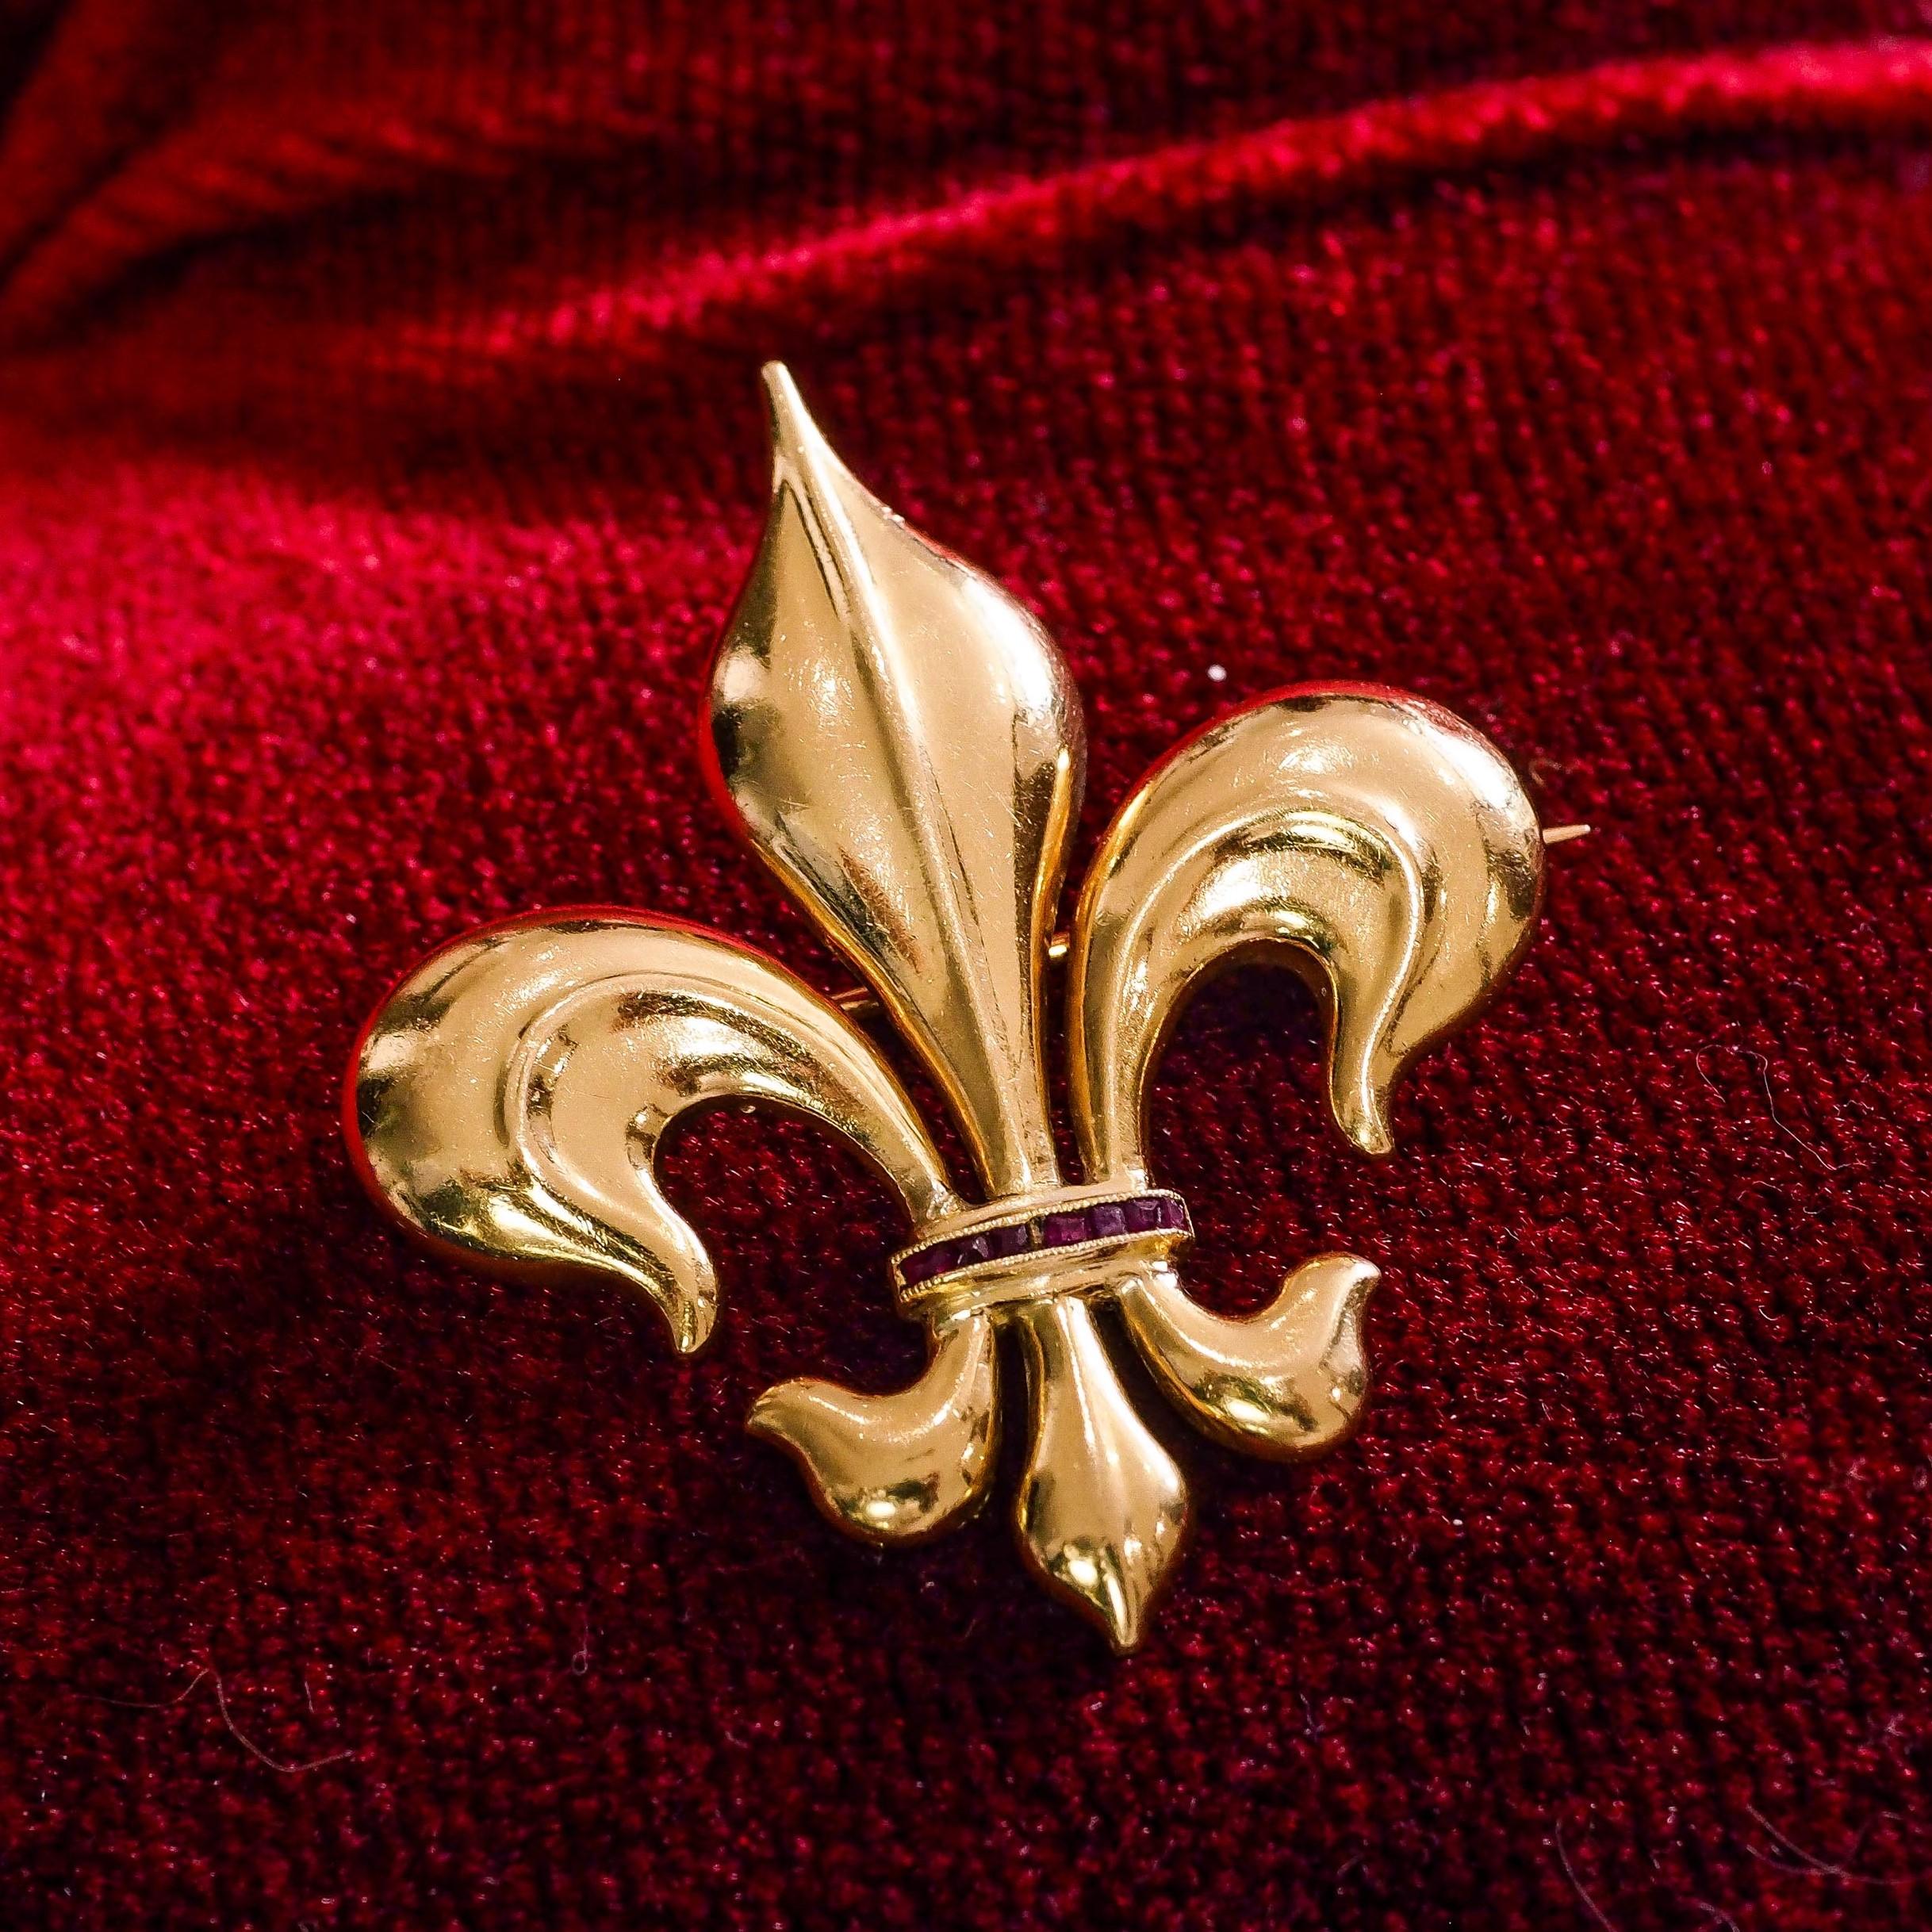 We are delighted to offer this magnificent and large Victorian 18K gold brooch.
  
The brooch is constructed entirely from solid 18K gold in the form of a fleur-de-lis. 
  
Elegantly sculpted with particular attention to exquisite curves and angles